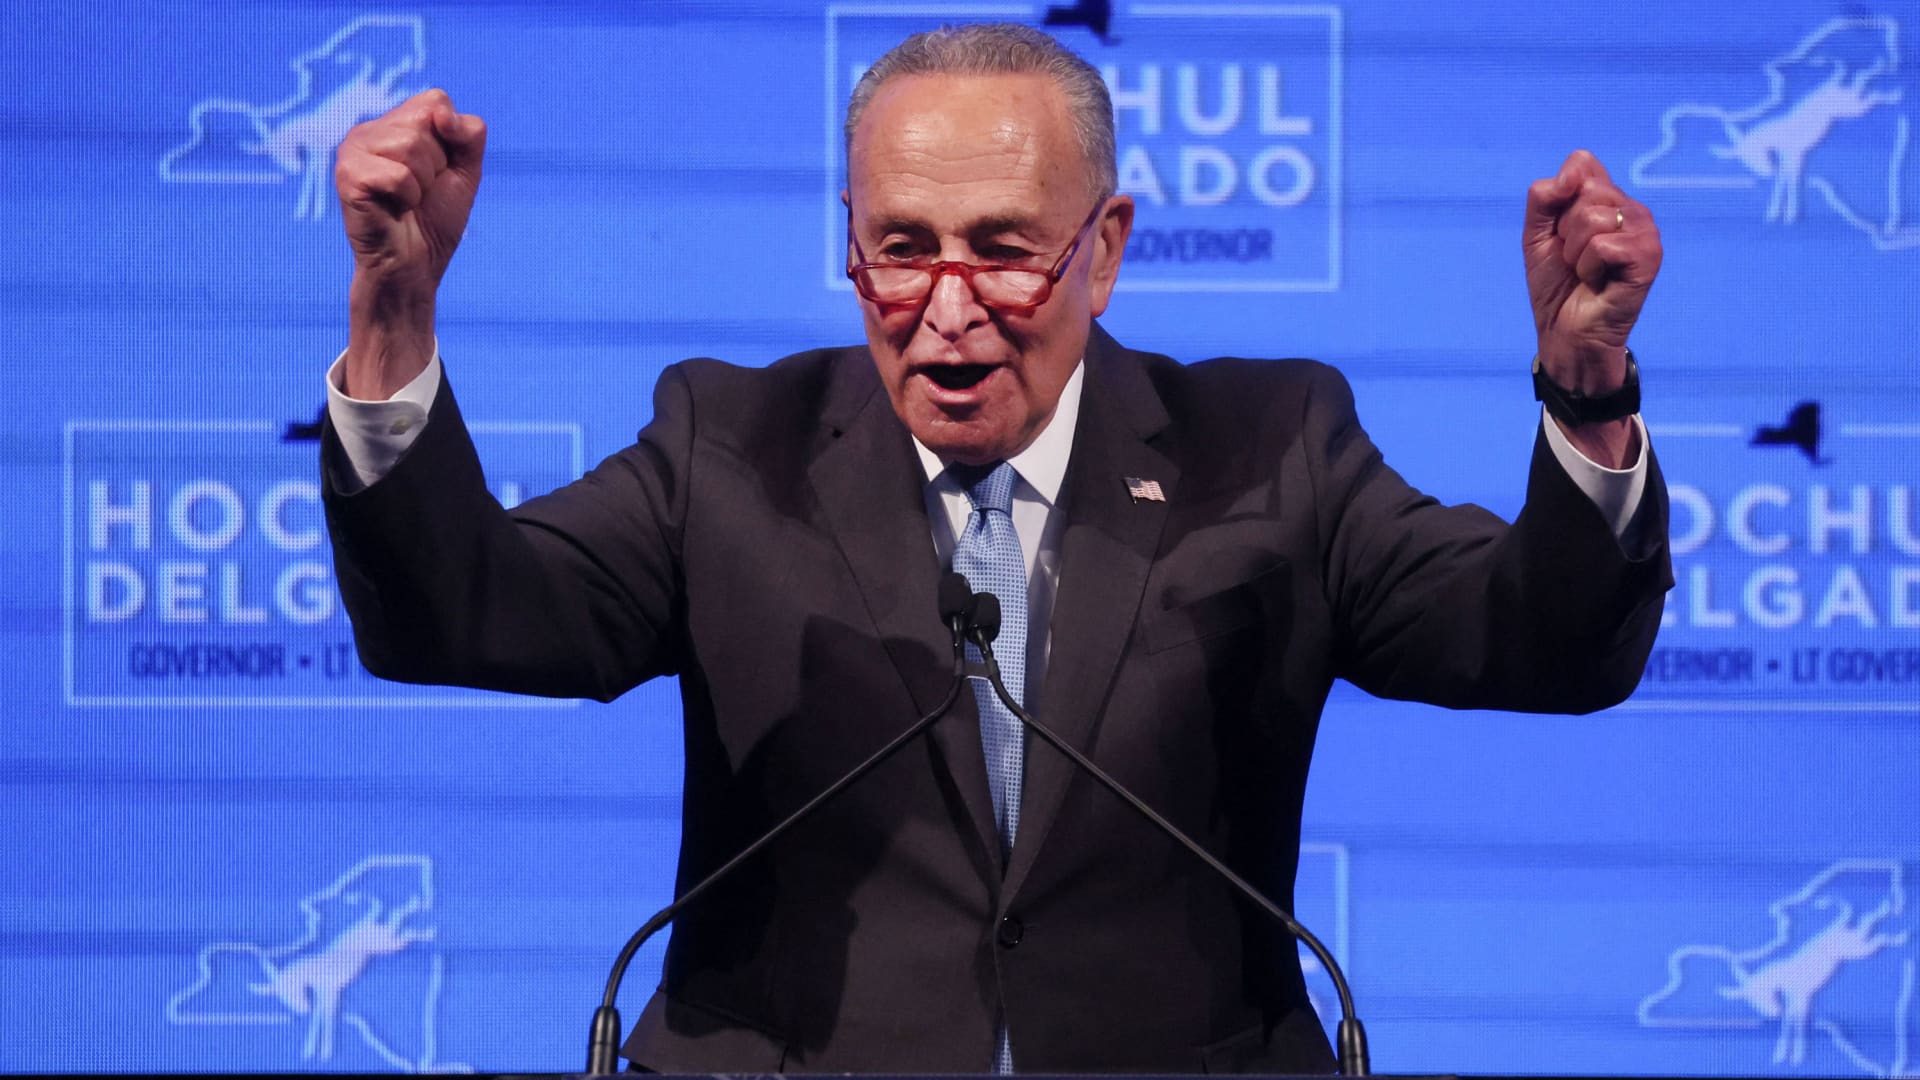 U.S. Senate Democratic leader Chuck Schumer (D-NY) speaks at a U.S. midterm election night party for New York Governor Kathy Hochul in New York, New York, U.S. November 8, 2022.